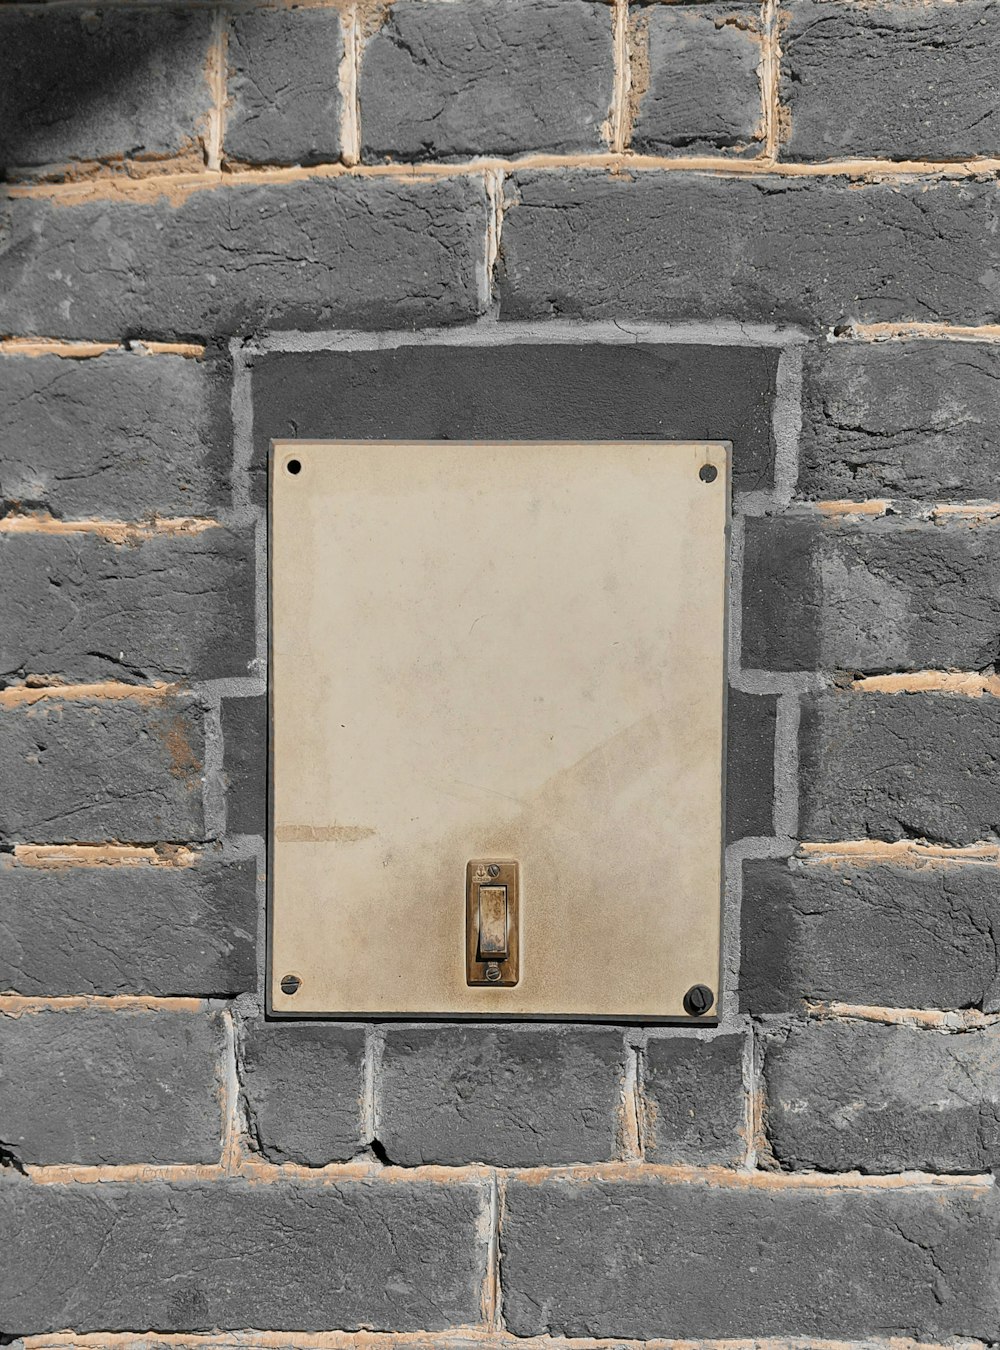 a brick wall with a light switch on it